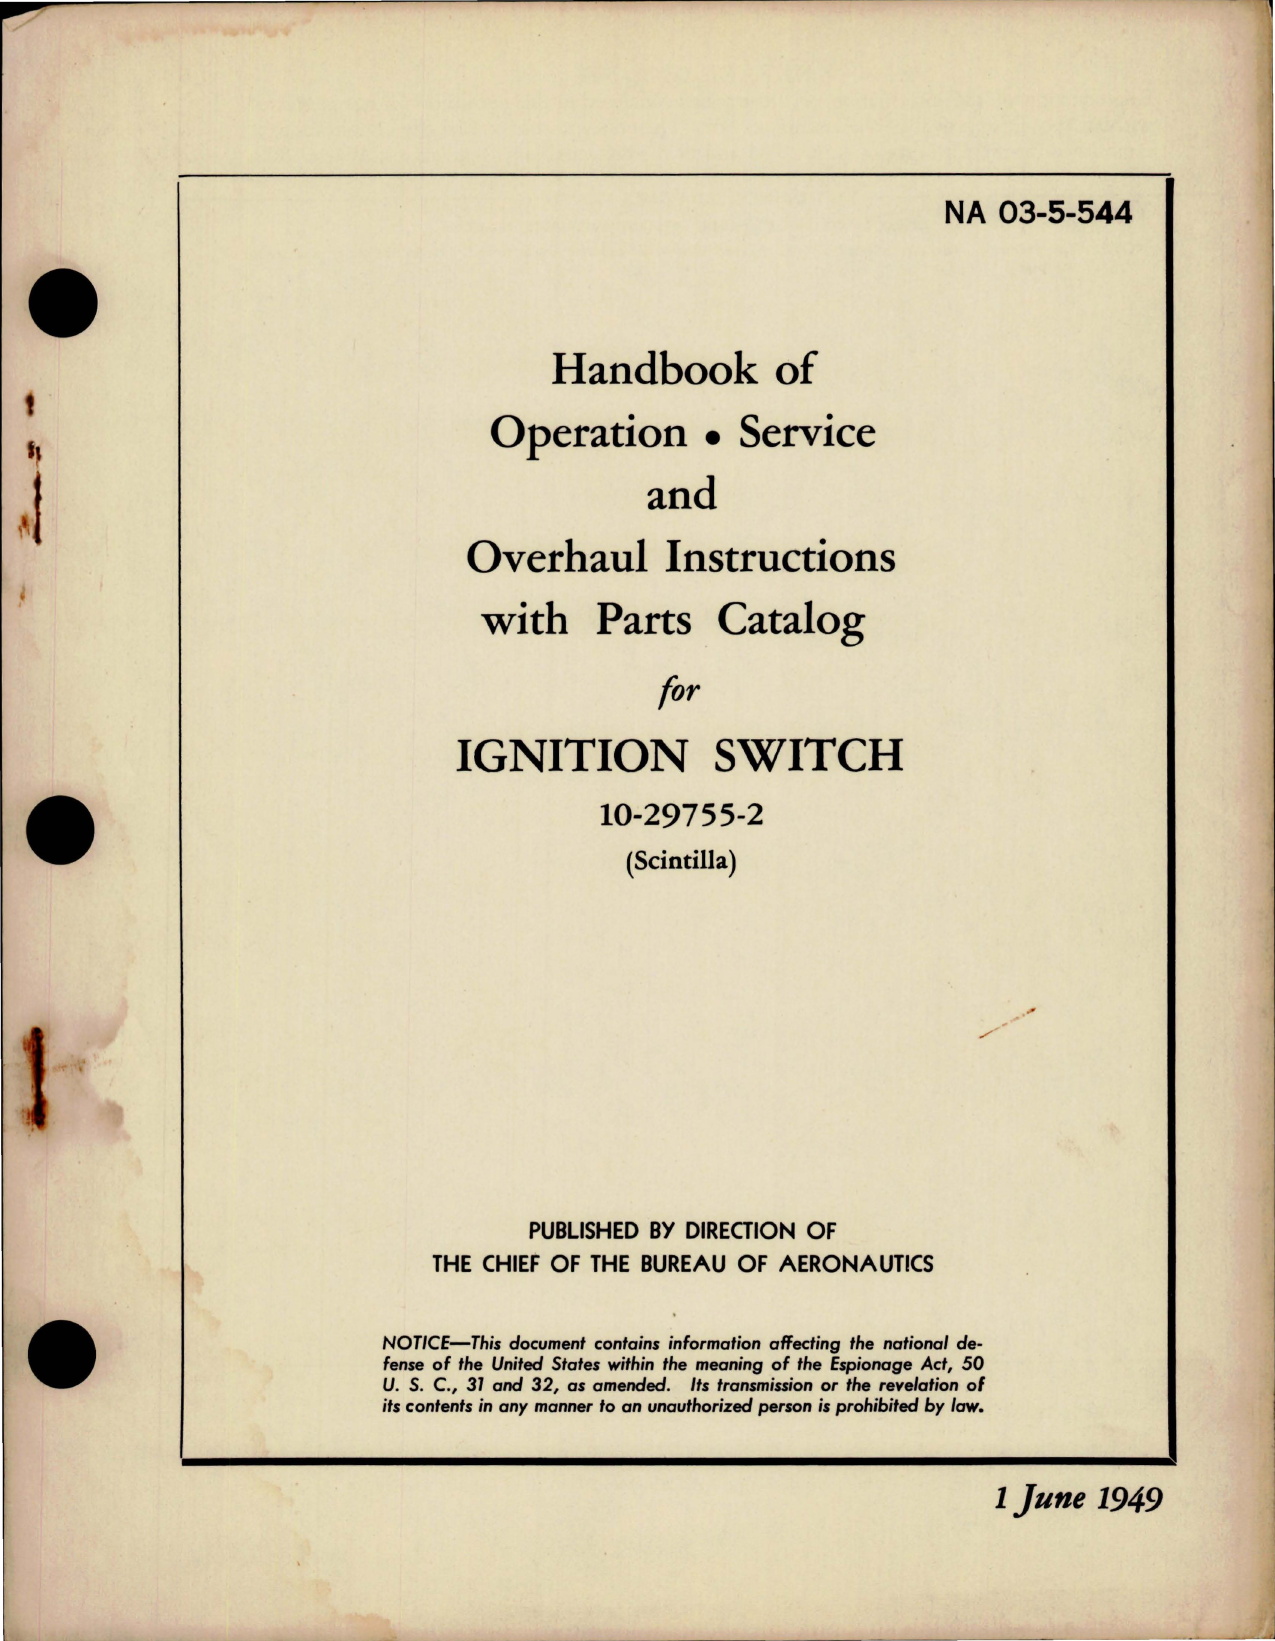 Sample page 1 from AirCorps Library document: Operation, Service, Overhaul Inst and Parts for Ignition Switch - 10-29755-2 